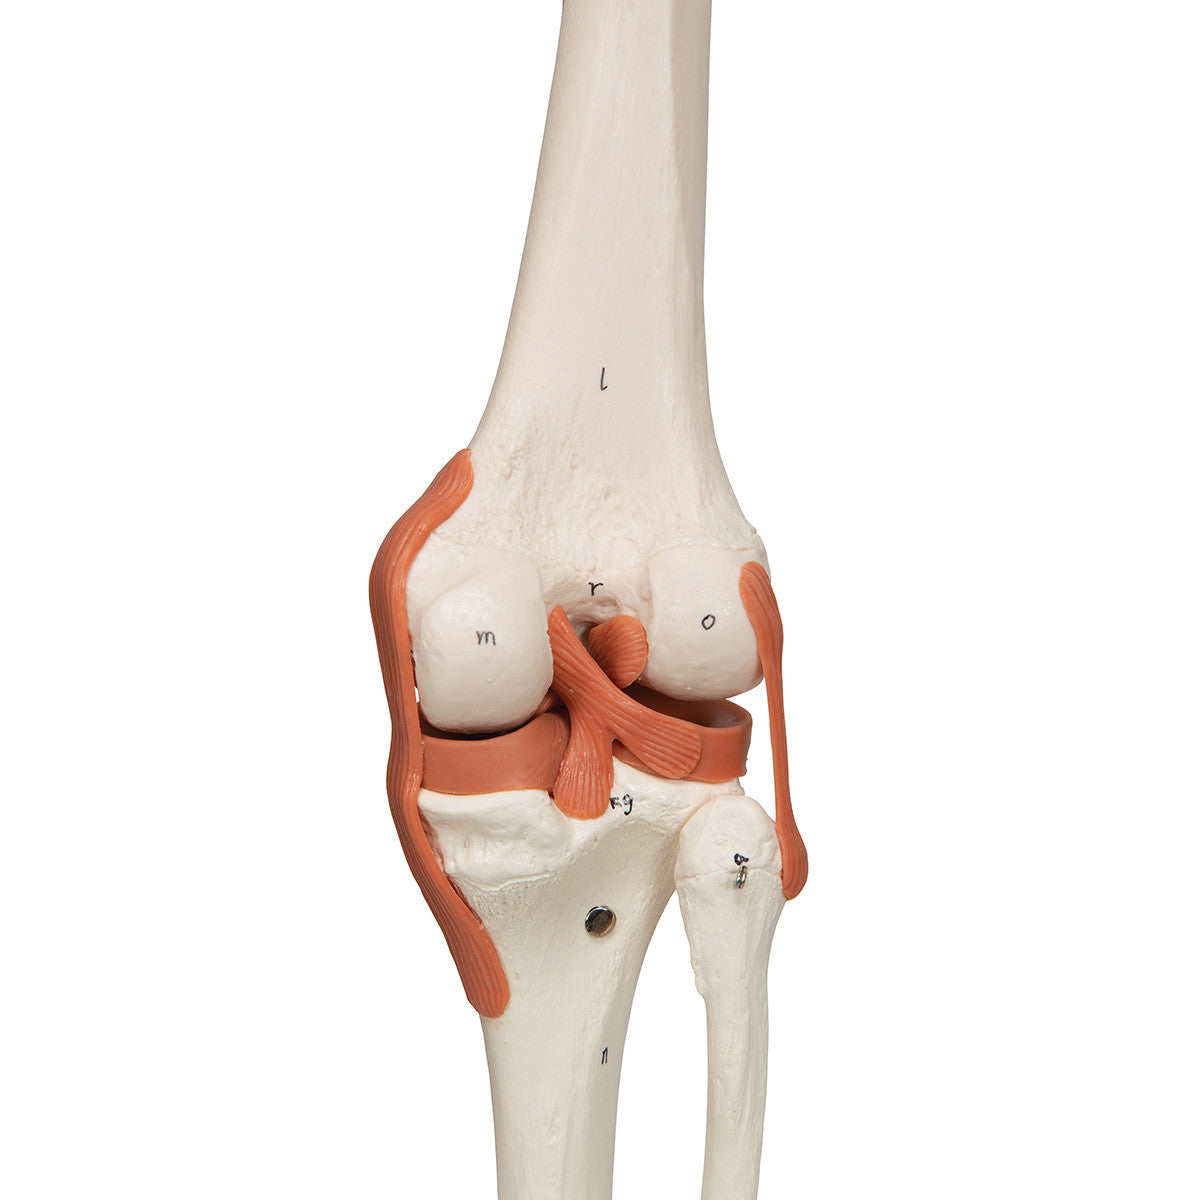 Super Skeleton with Muscle and Ligaments - knee detail